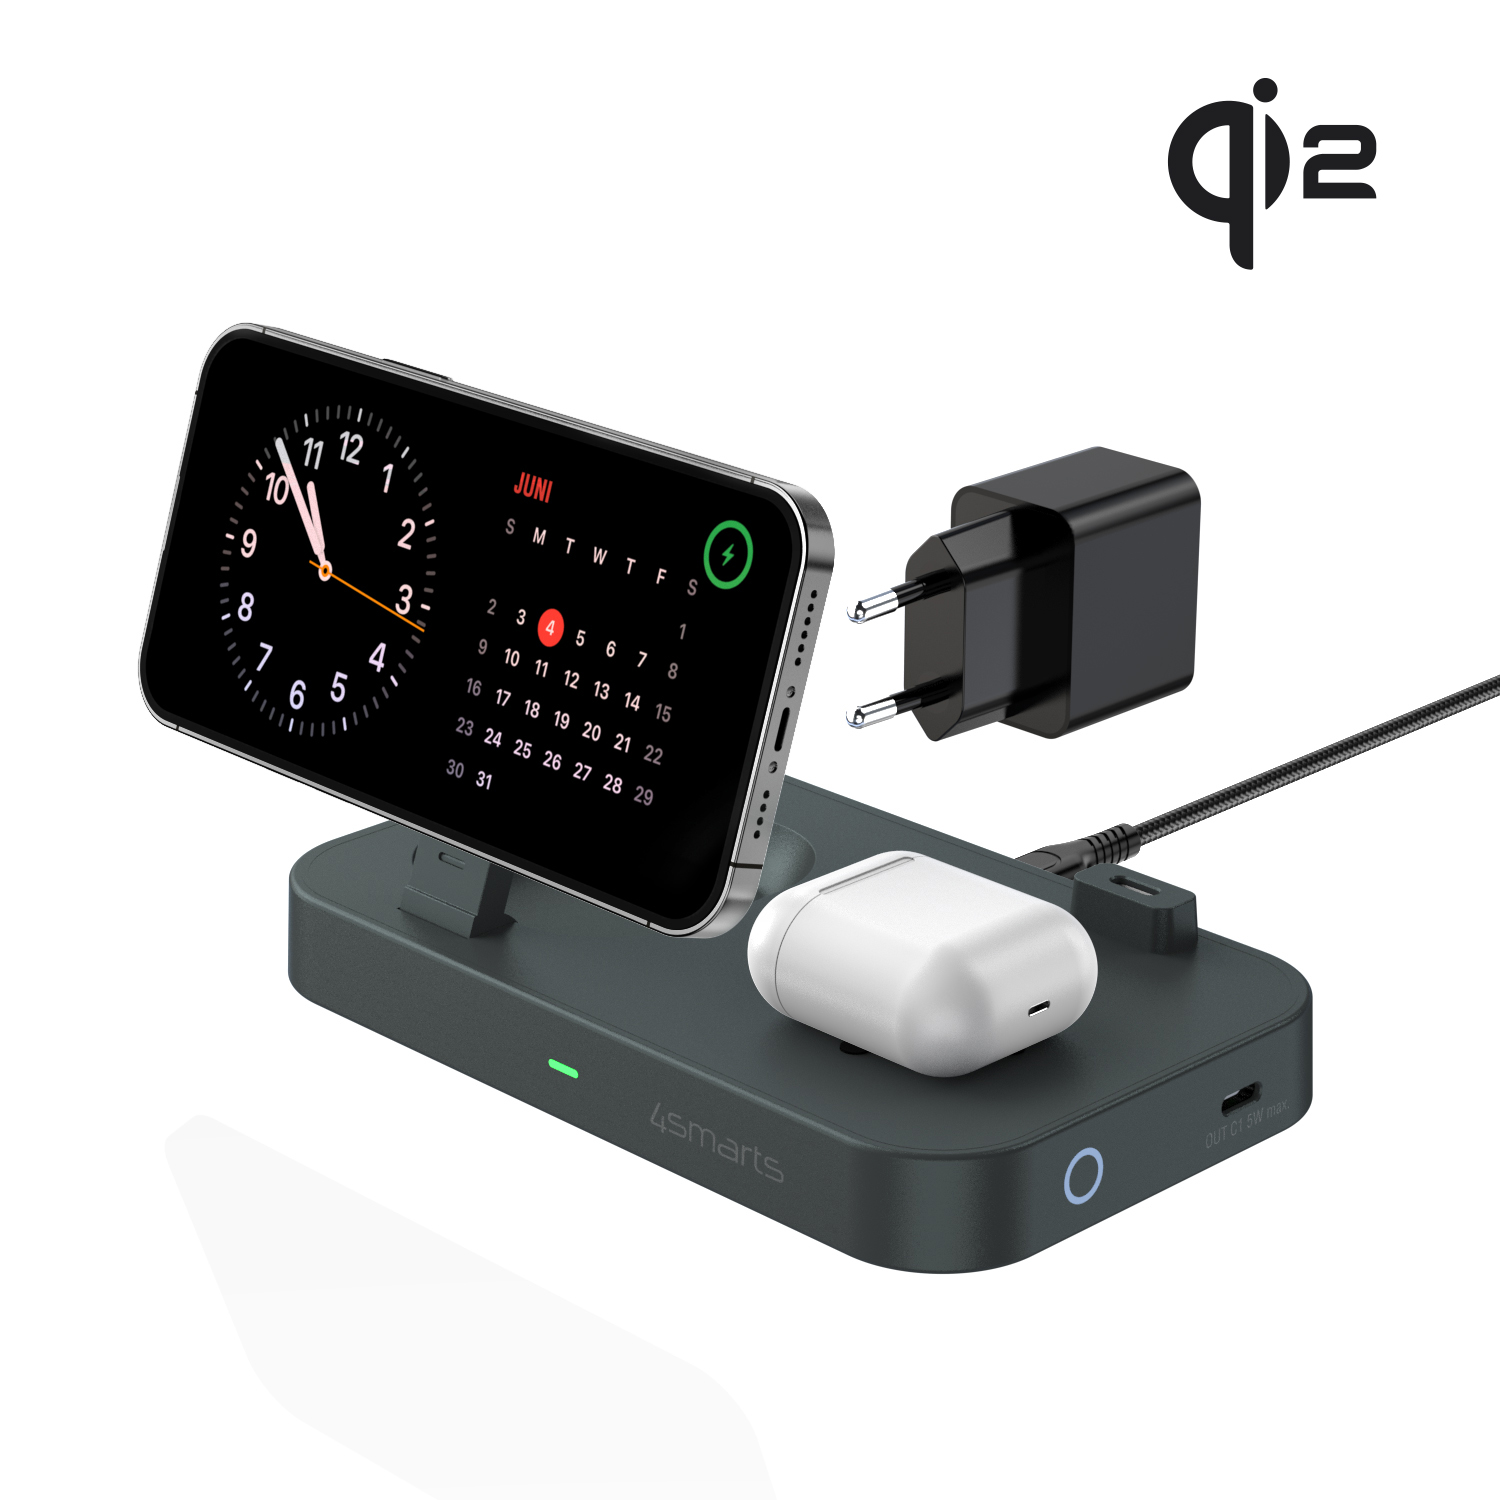 The 3 in 1 4smarts Qi2 Trident Charger is the perfect companion for your iPhone, Apple Watch and TWS Headset.